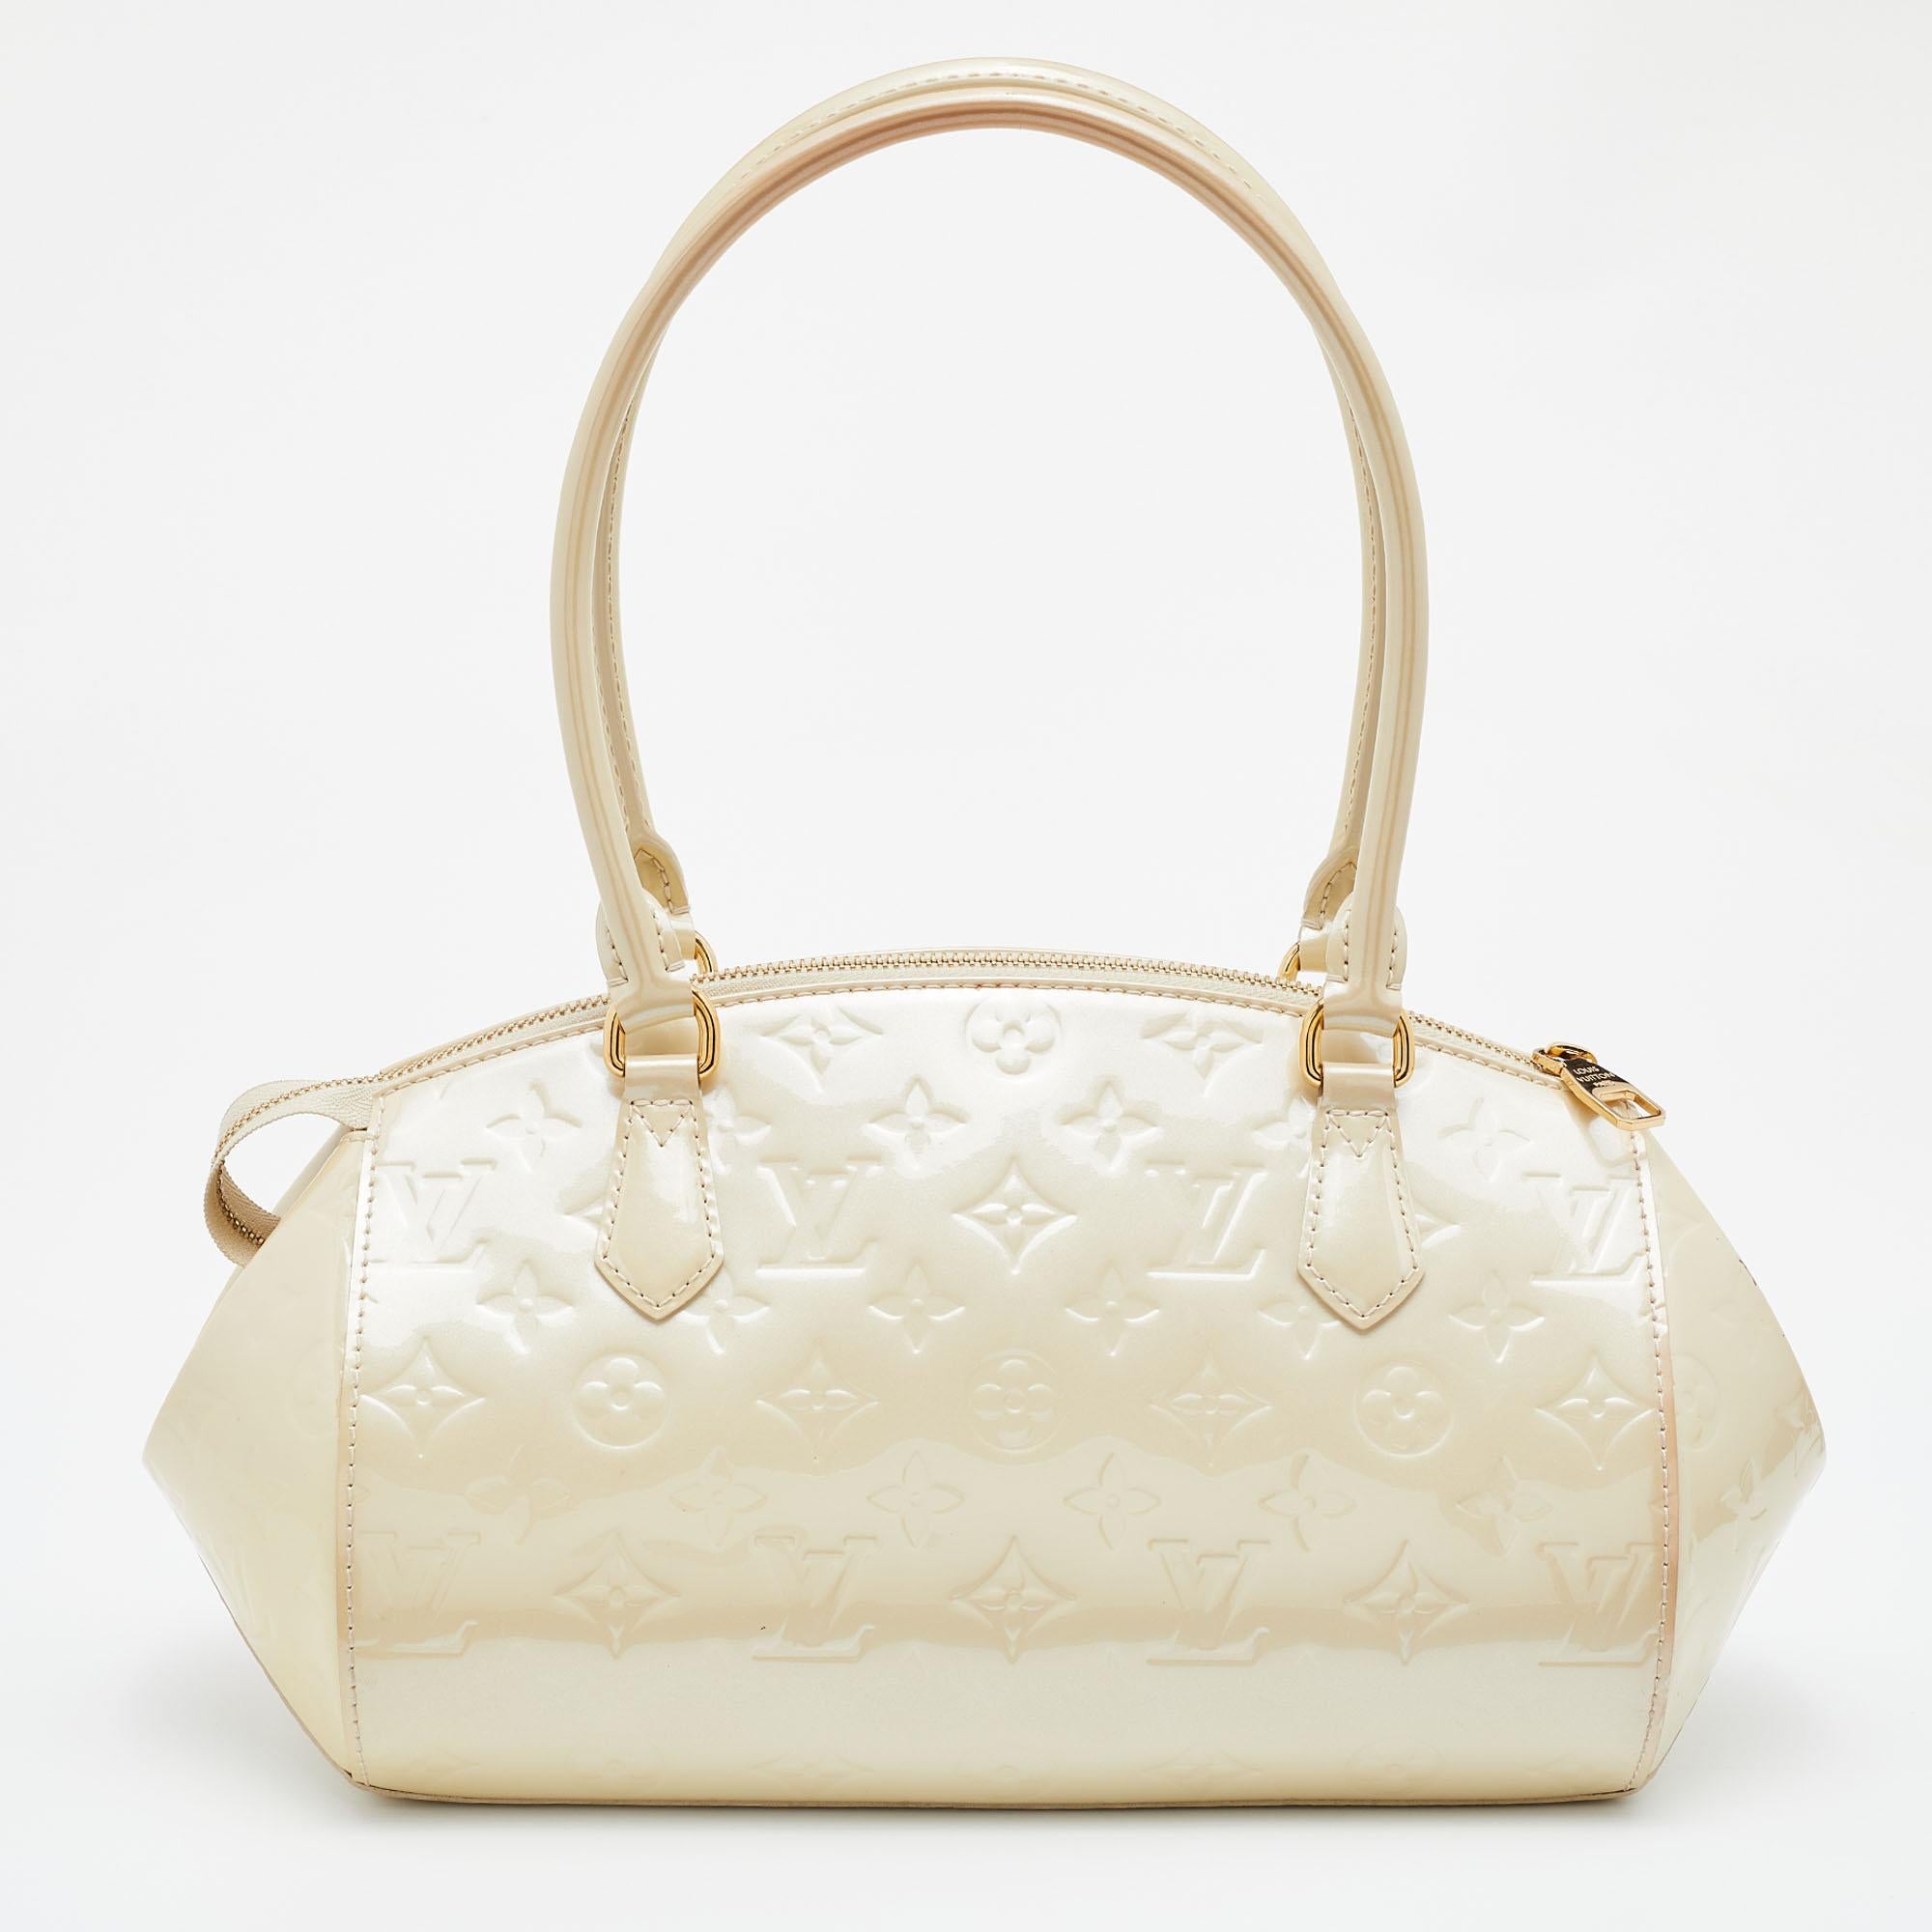 The Vernis range of handbags by Louis Vuitton is famous and sought after by women worldwide. This Sherwood bag is a creation you will love to own. It has been crafted from monogram Vernis leather and styled with a zipper that opens to a well-sized